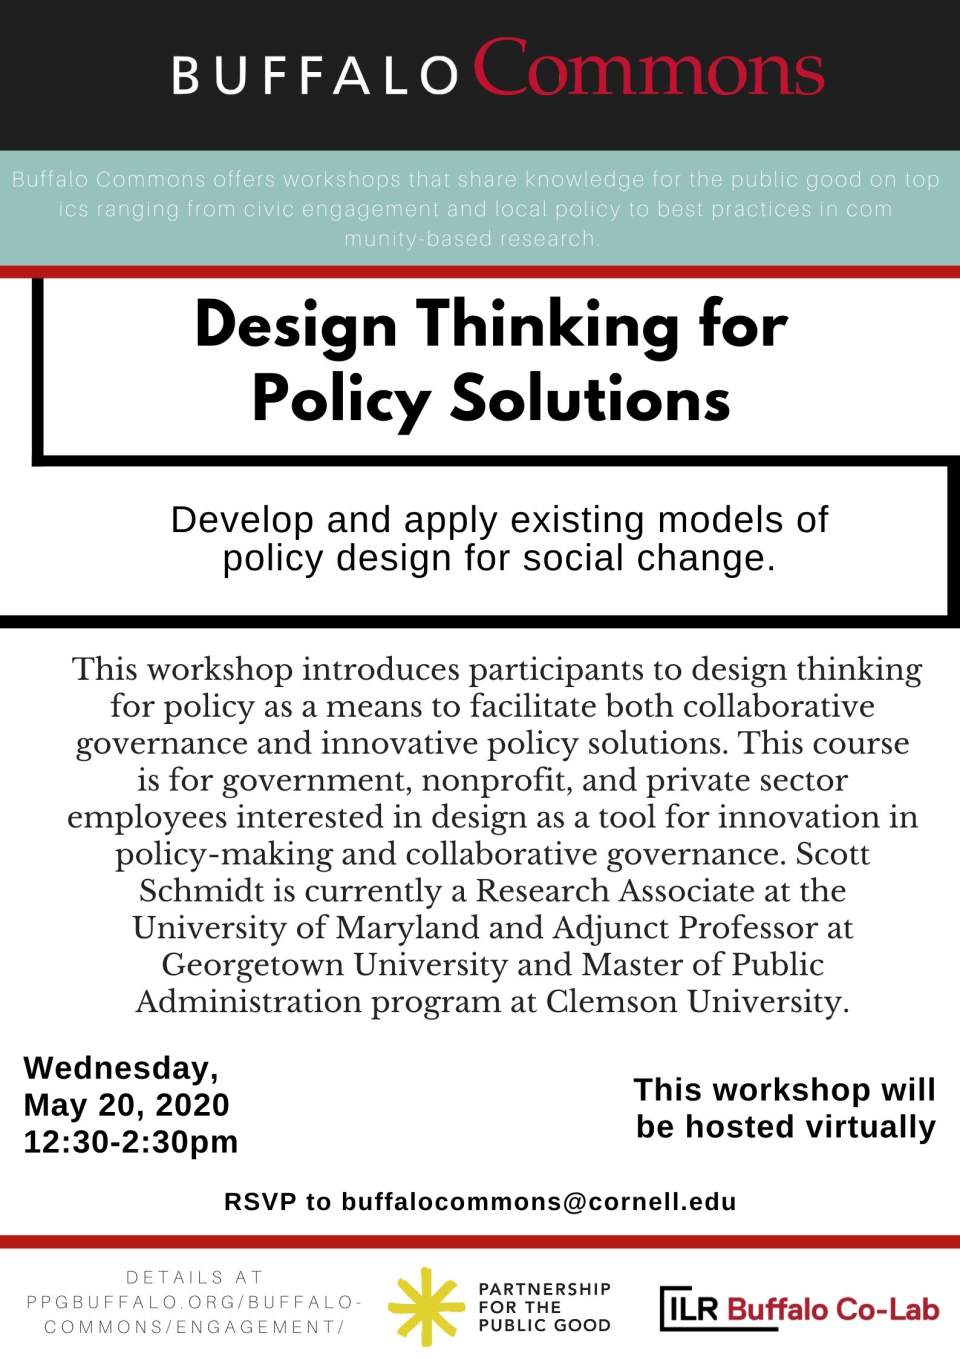 Buffalo Commons Virtual Workshop: Design Thinking for Policy Solutions